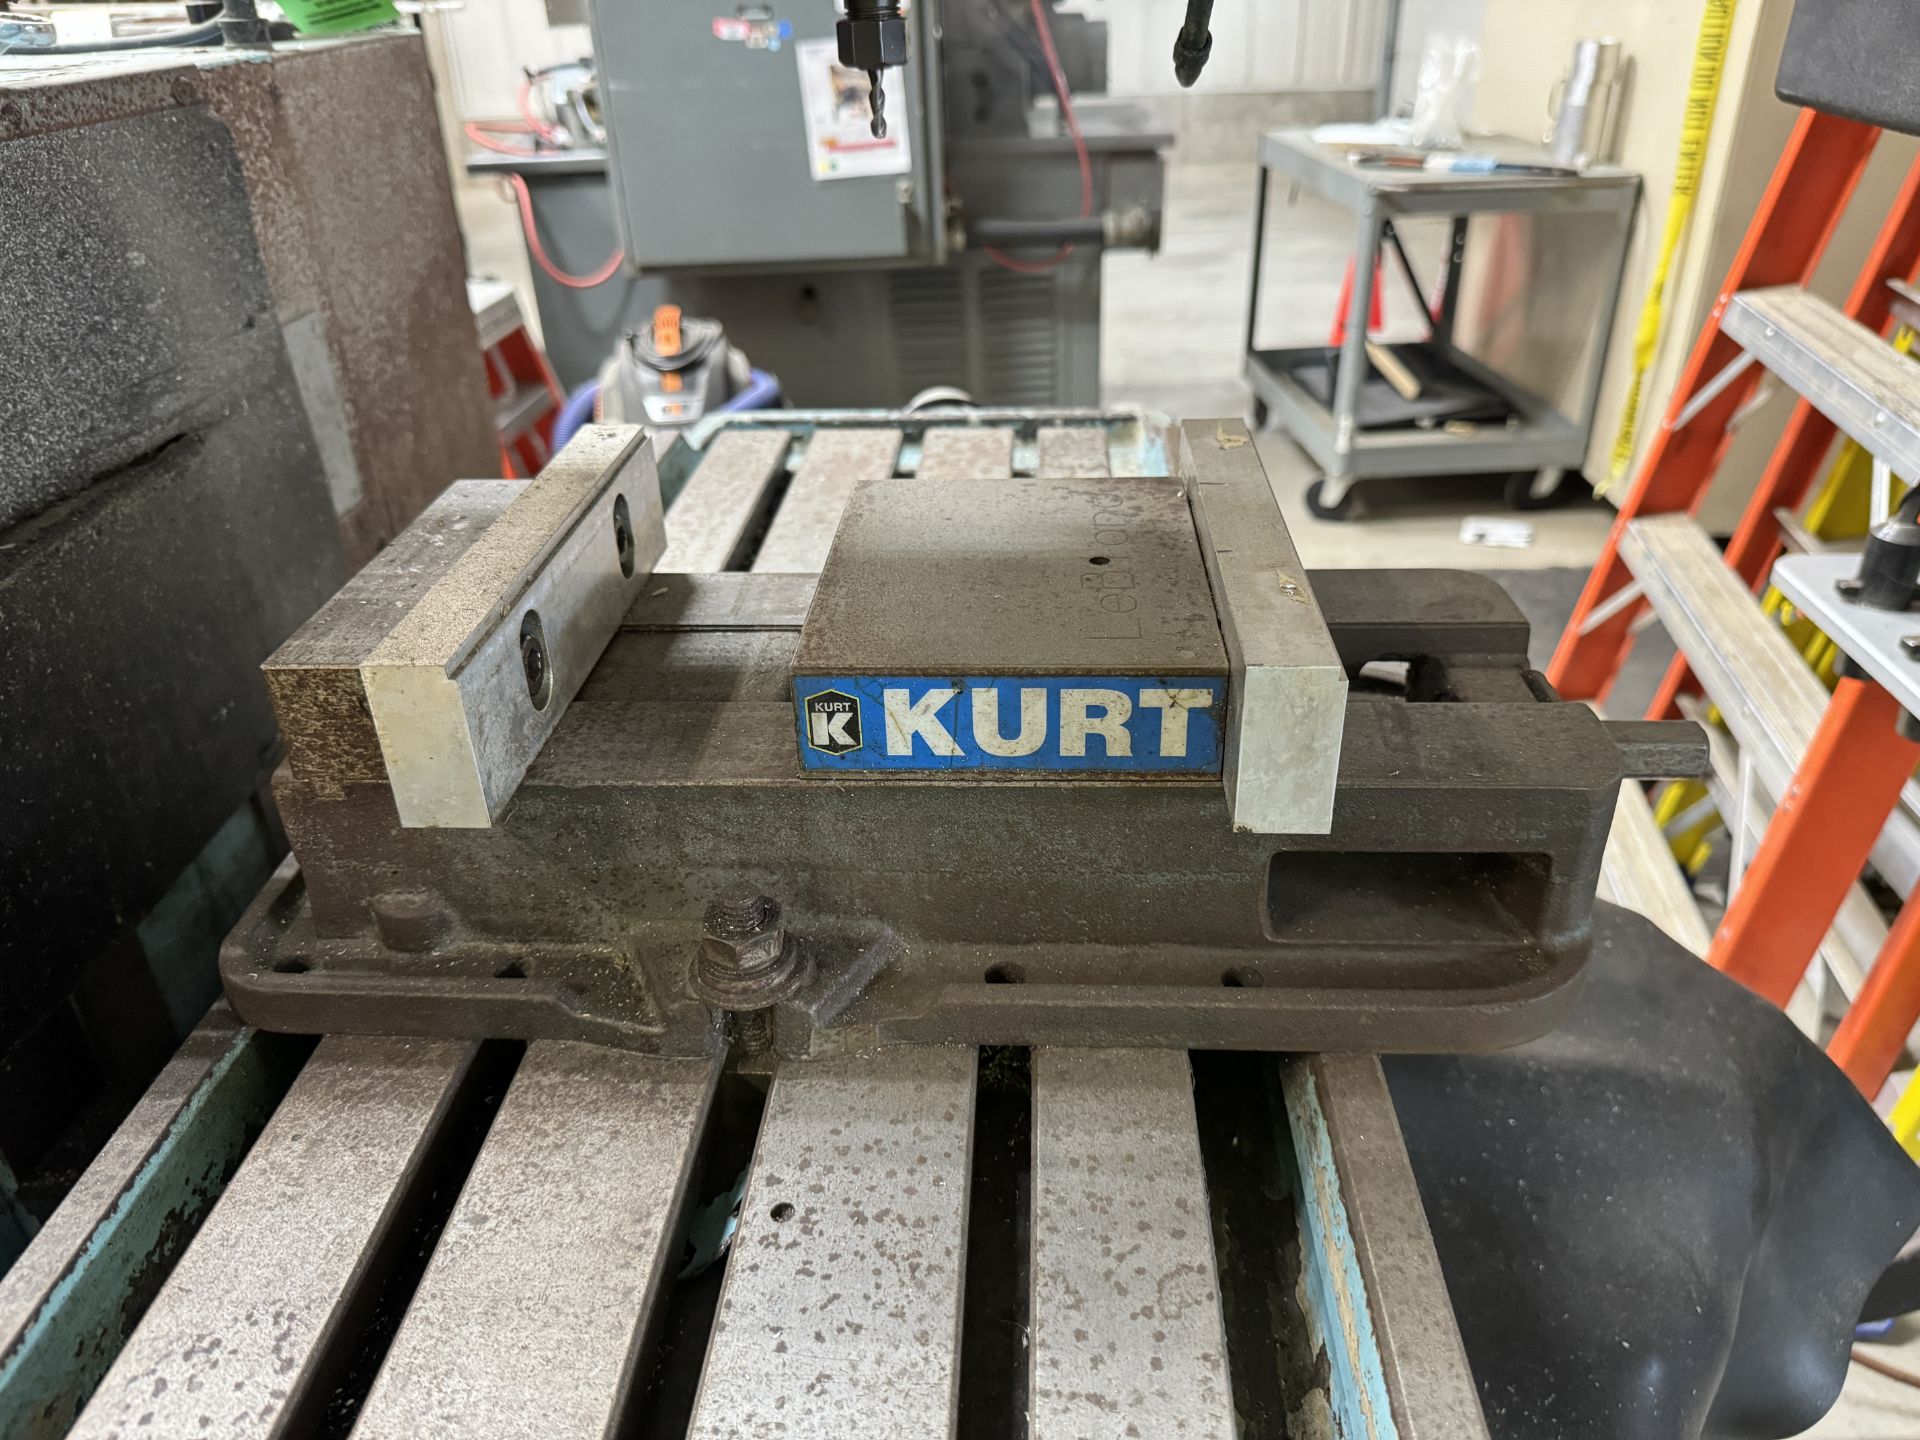 HURCO KM-3 3-AXIS CNC KNEE MILL WITH HURCO ULTIMAX KM-3P CONTROL INCLUDES TOOLING AND KURT VISE - Image 6 of 9